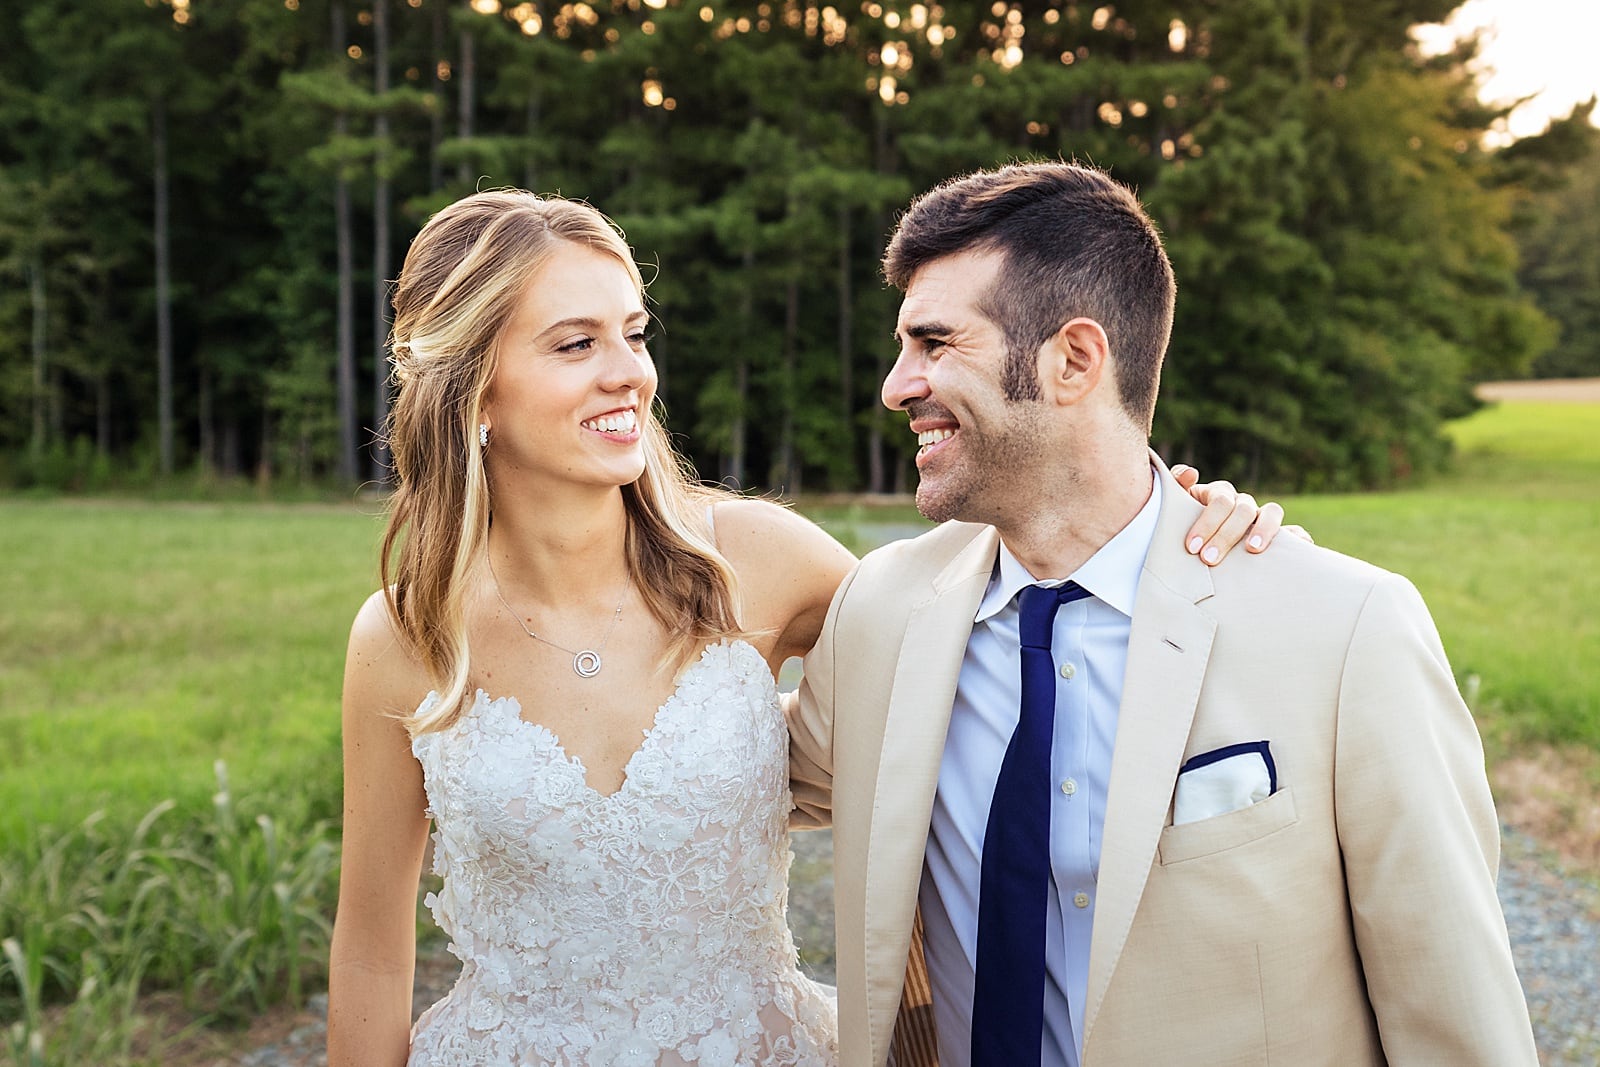 make sure you make time for golden hour portraits on your wedding day!